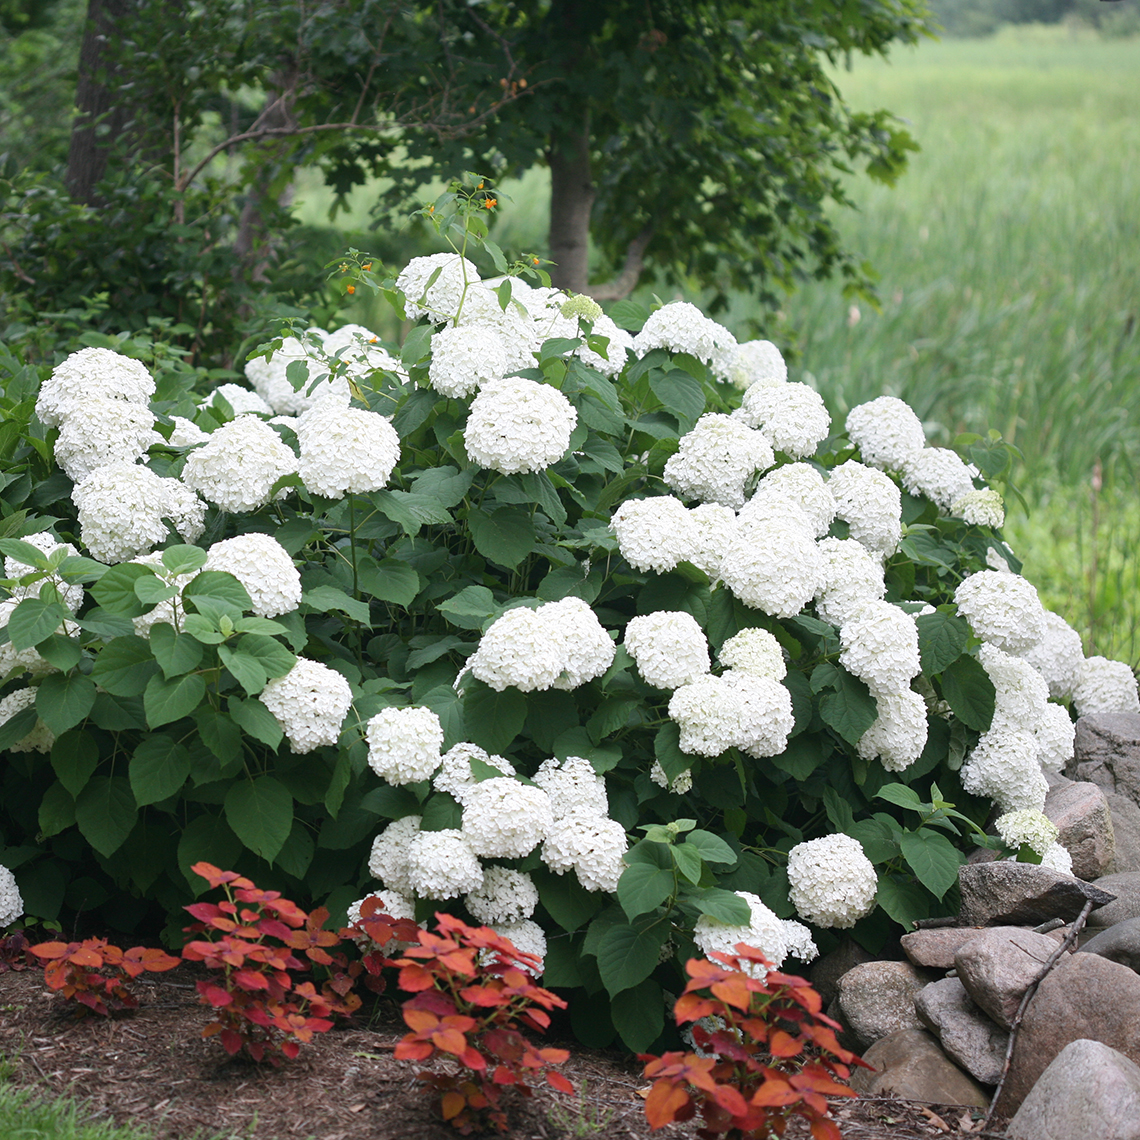 A specimen of Incrediball hydrangea covered in large white blooms